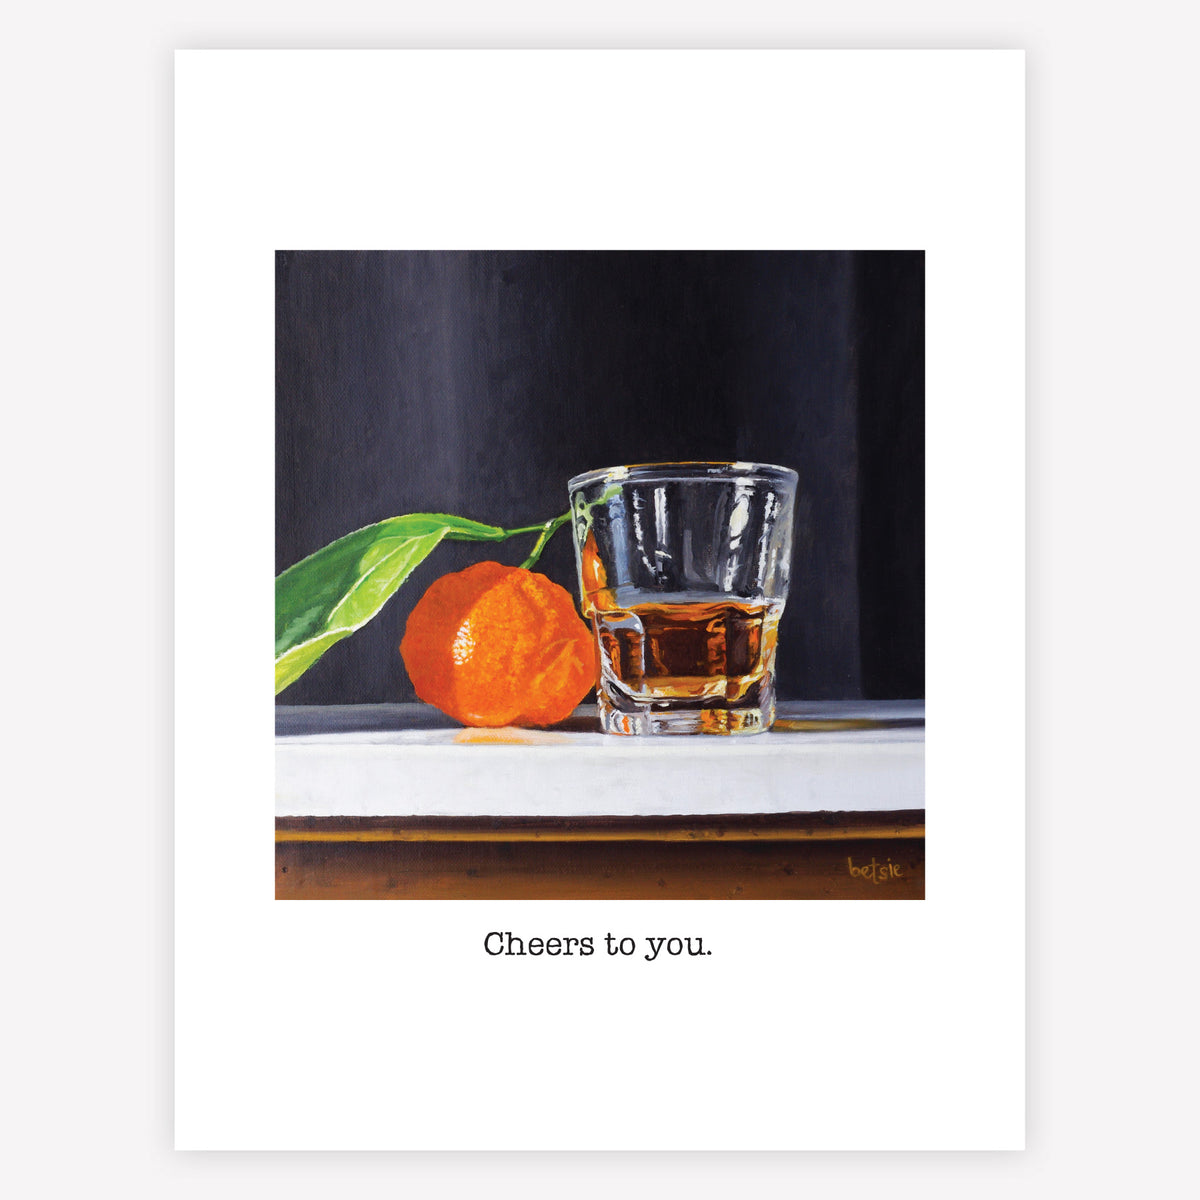 "Cheers to you" Greeting Card